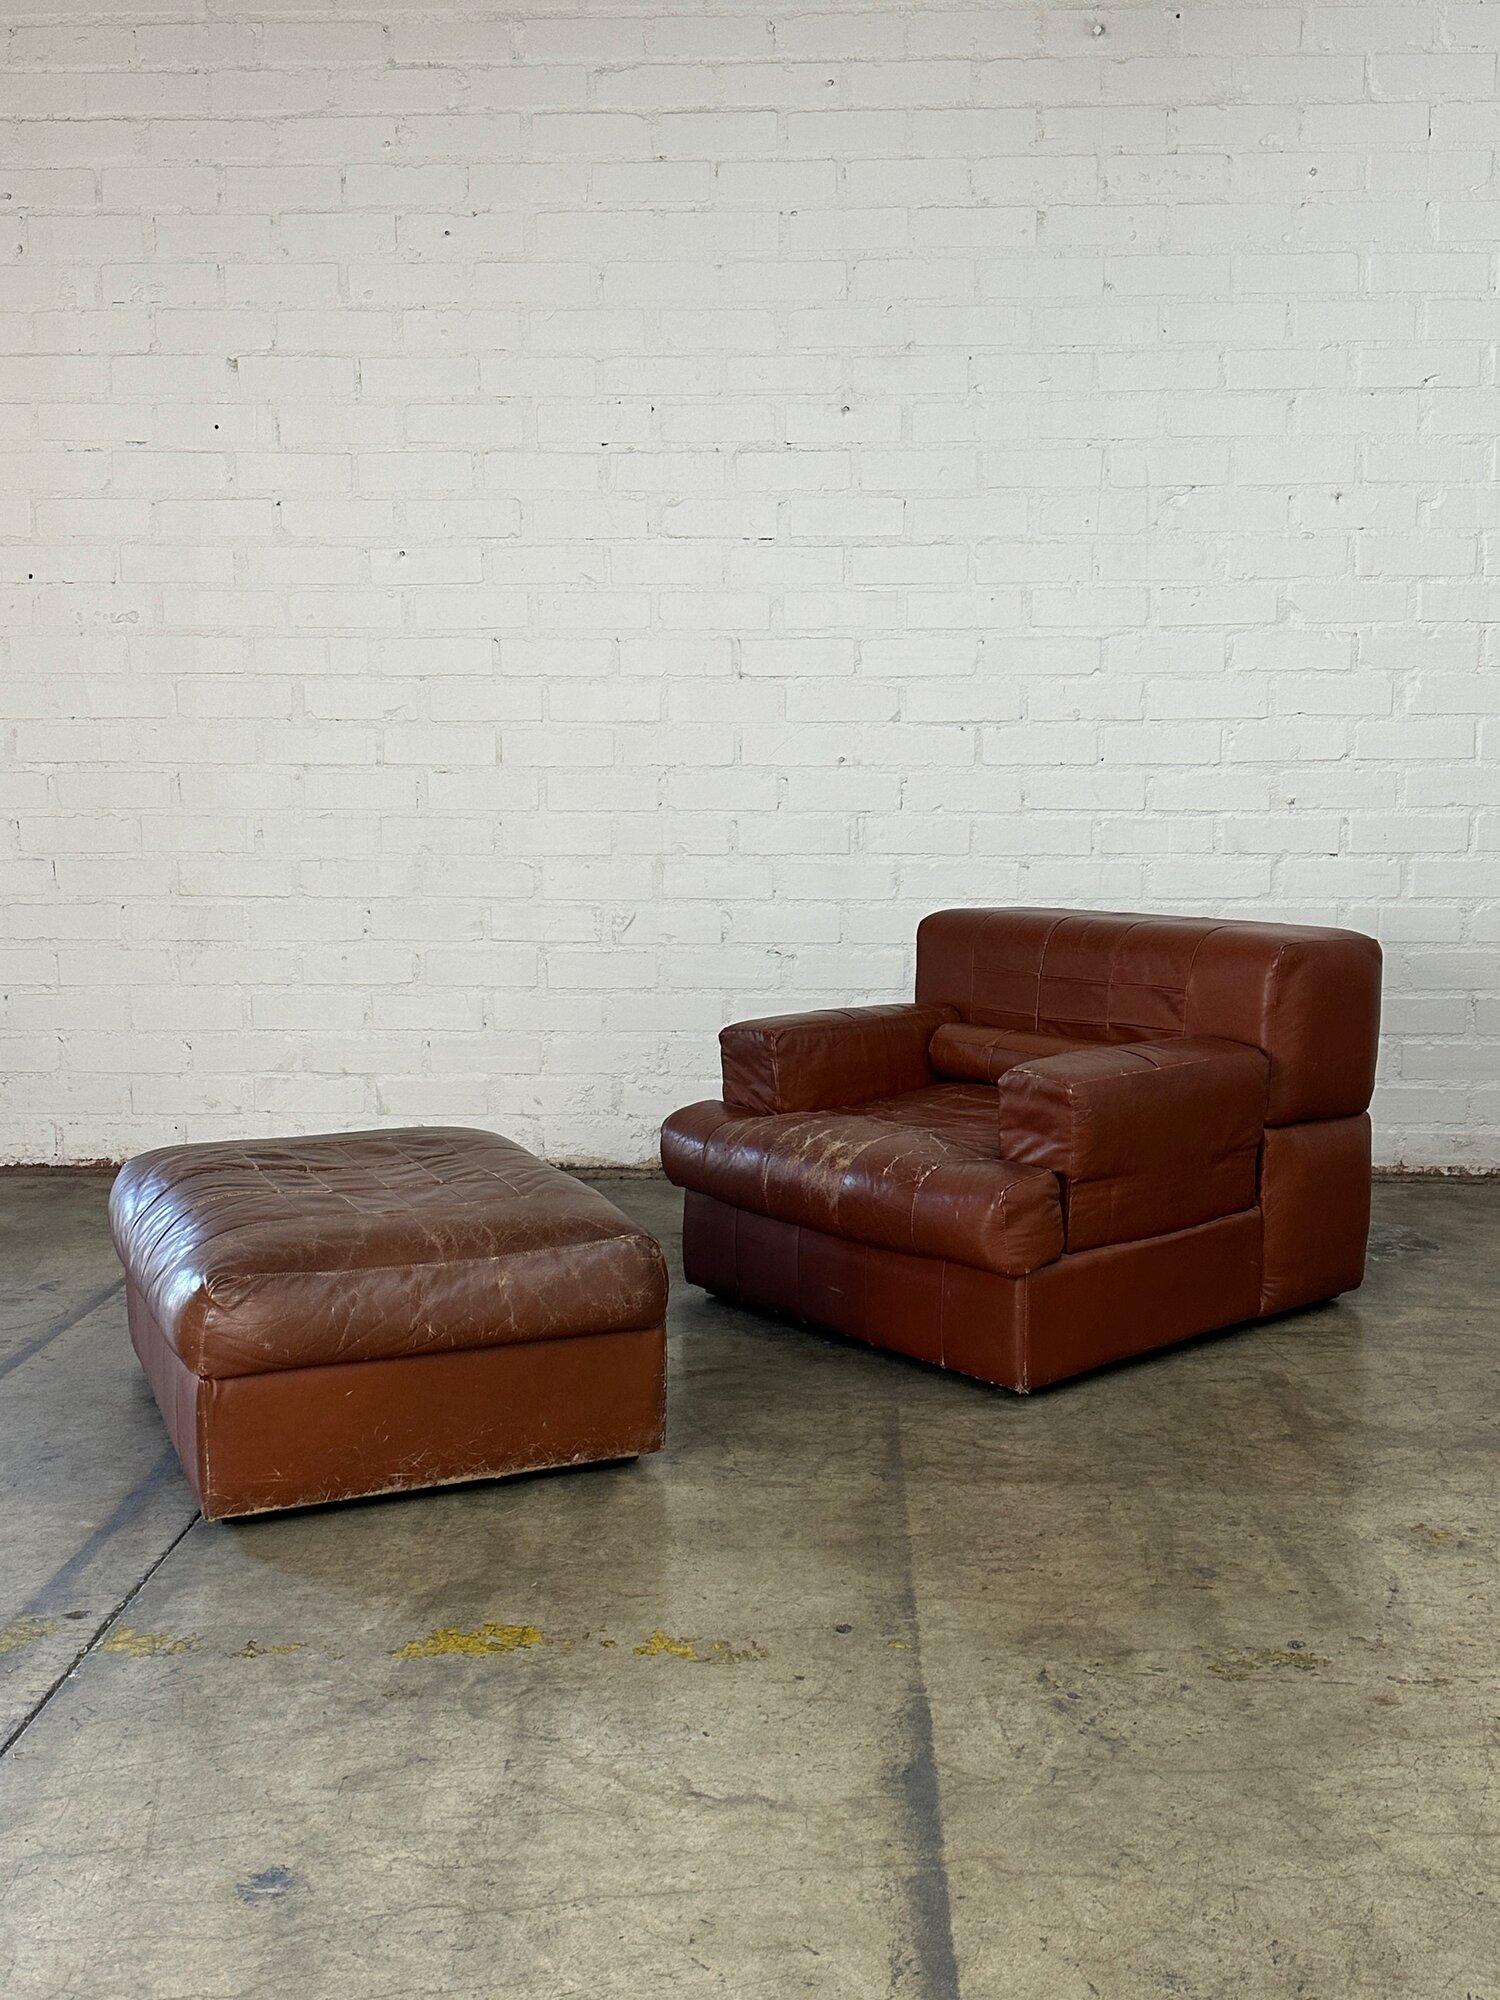 Leather Ajustable Percival Lafer lounge chair and ottoman For Sale